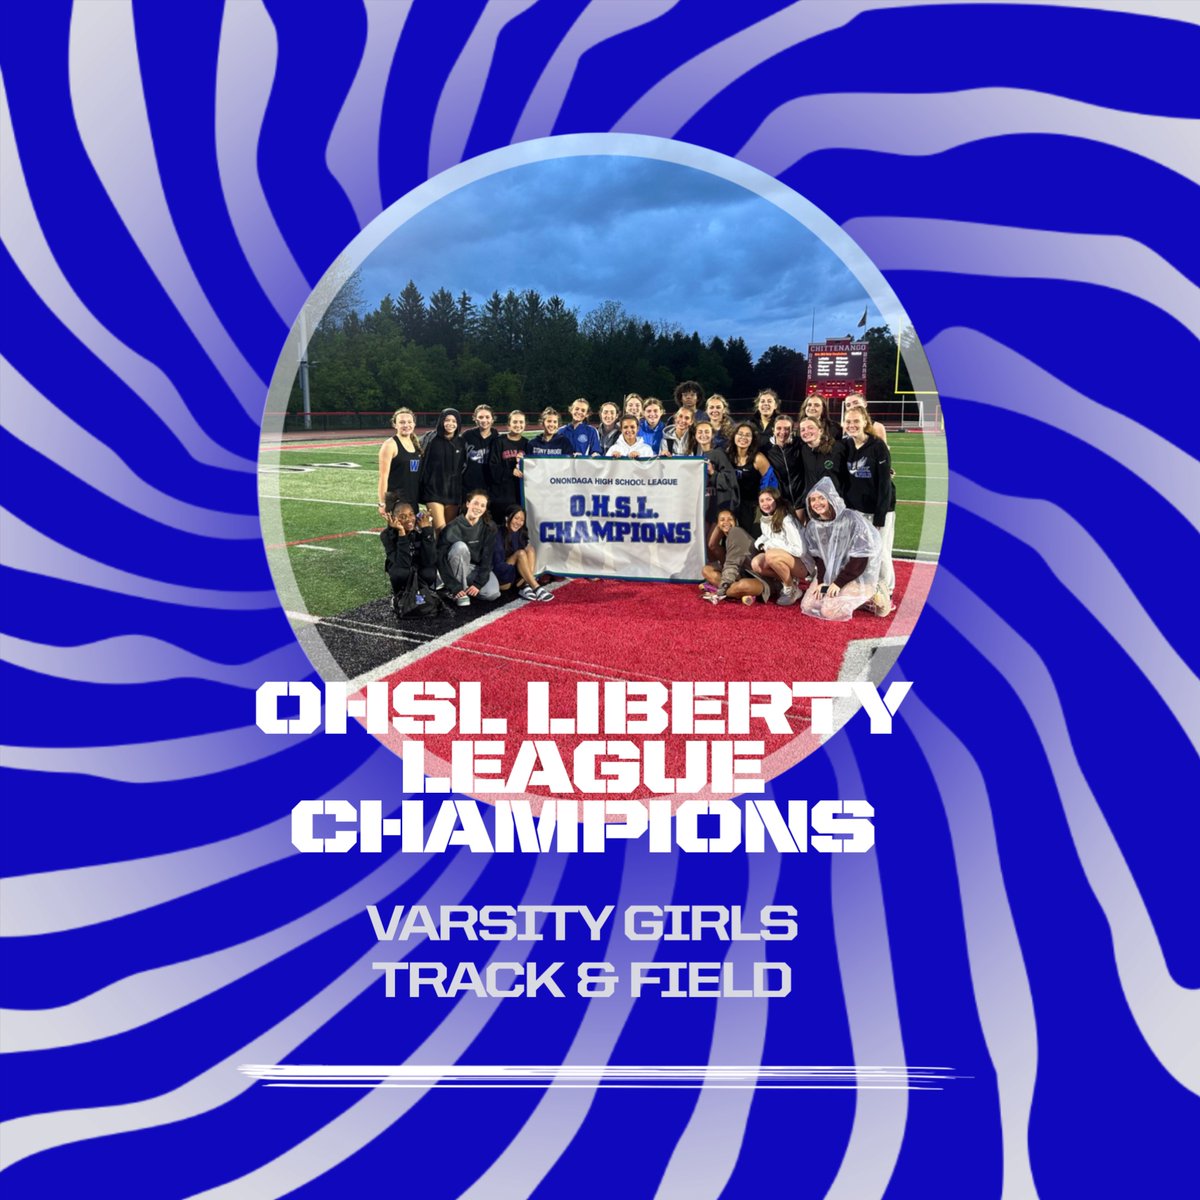 CONGRATULATIONS TO THE VARSITY GIRLS OUTDOOR TRACK & FIELD TEAM ON WINNING THE OHSL LIBERTY DIVISION CHAMPIONSHIP!! 👏🏻